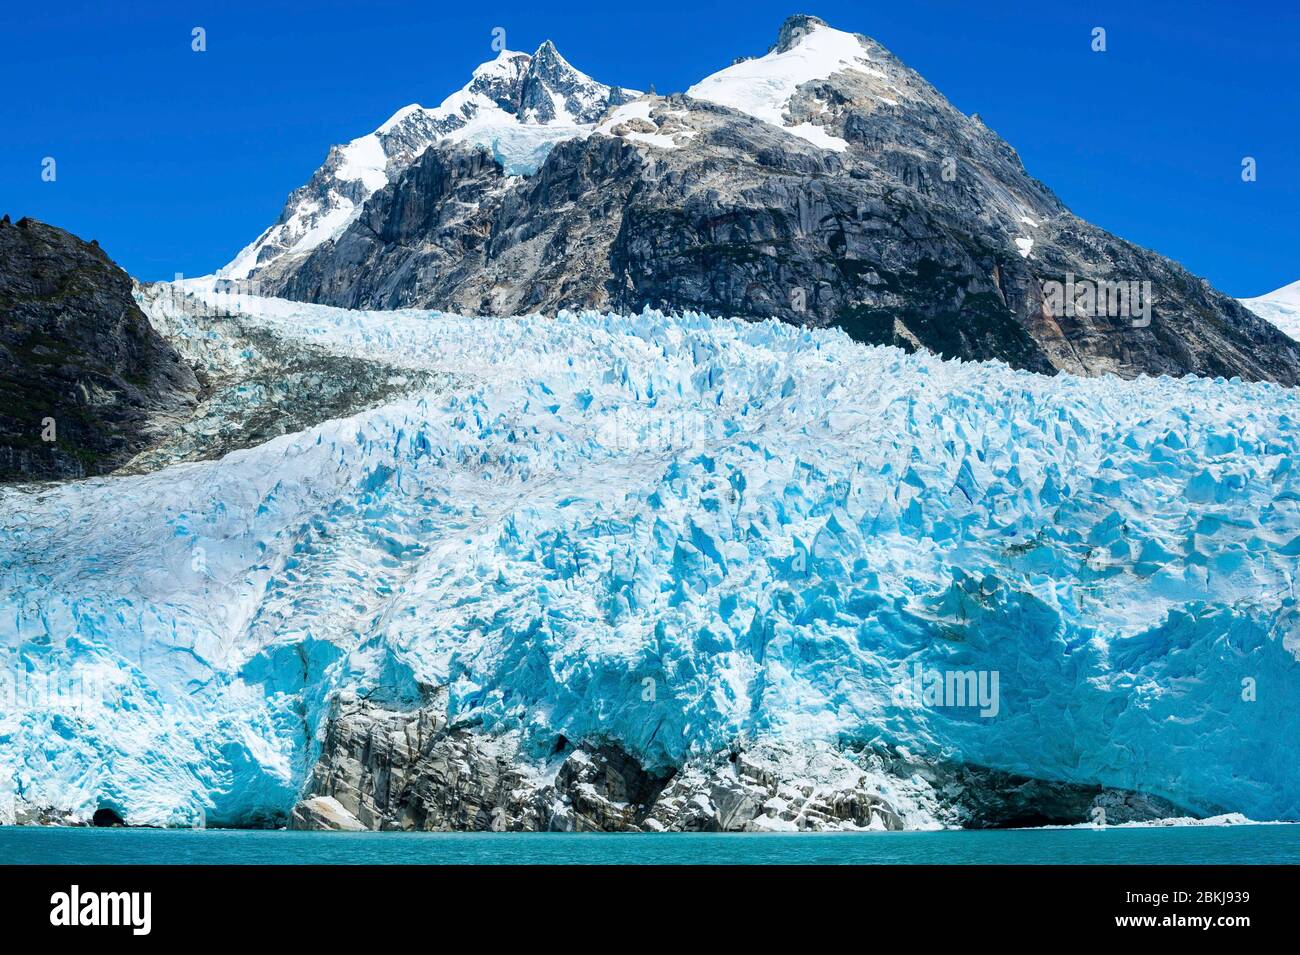 Chile, Patagonia, Aysen, Coyhaique, the titanic blue ice front of the Nevado Leones, high above several buildings, is best seen from a zodiac, at a respectable distance Stock Photo